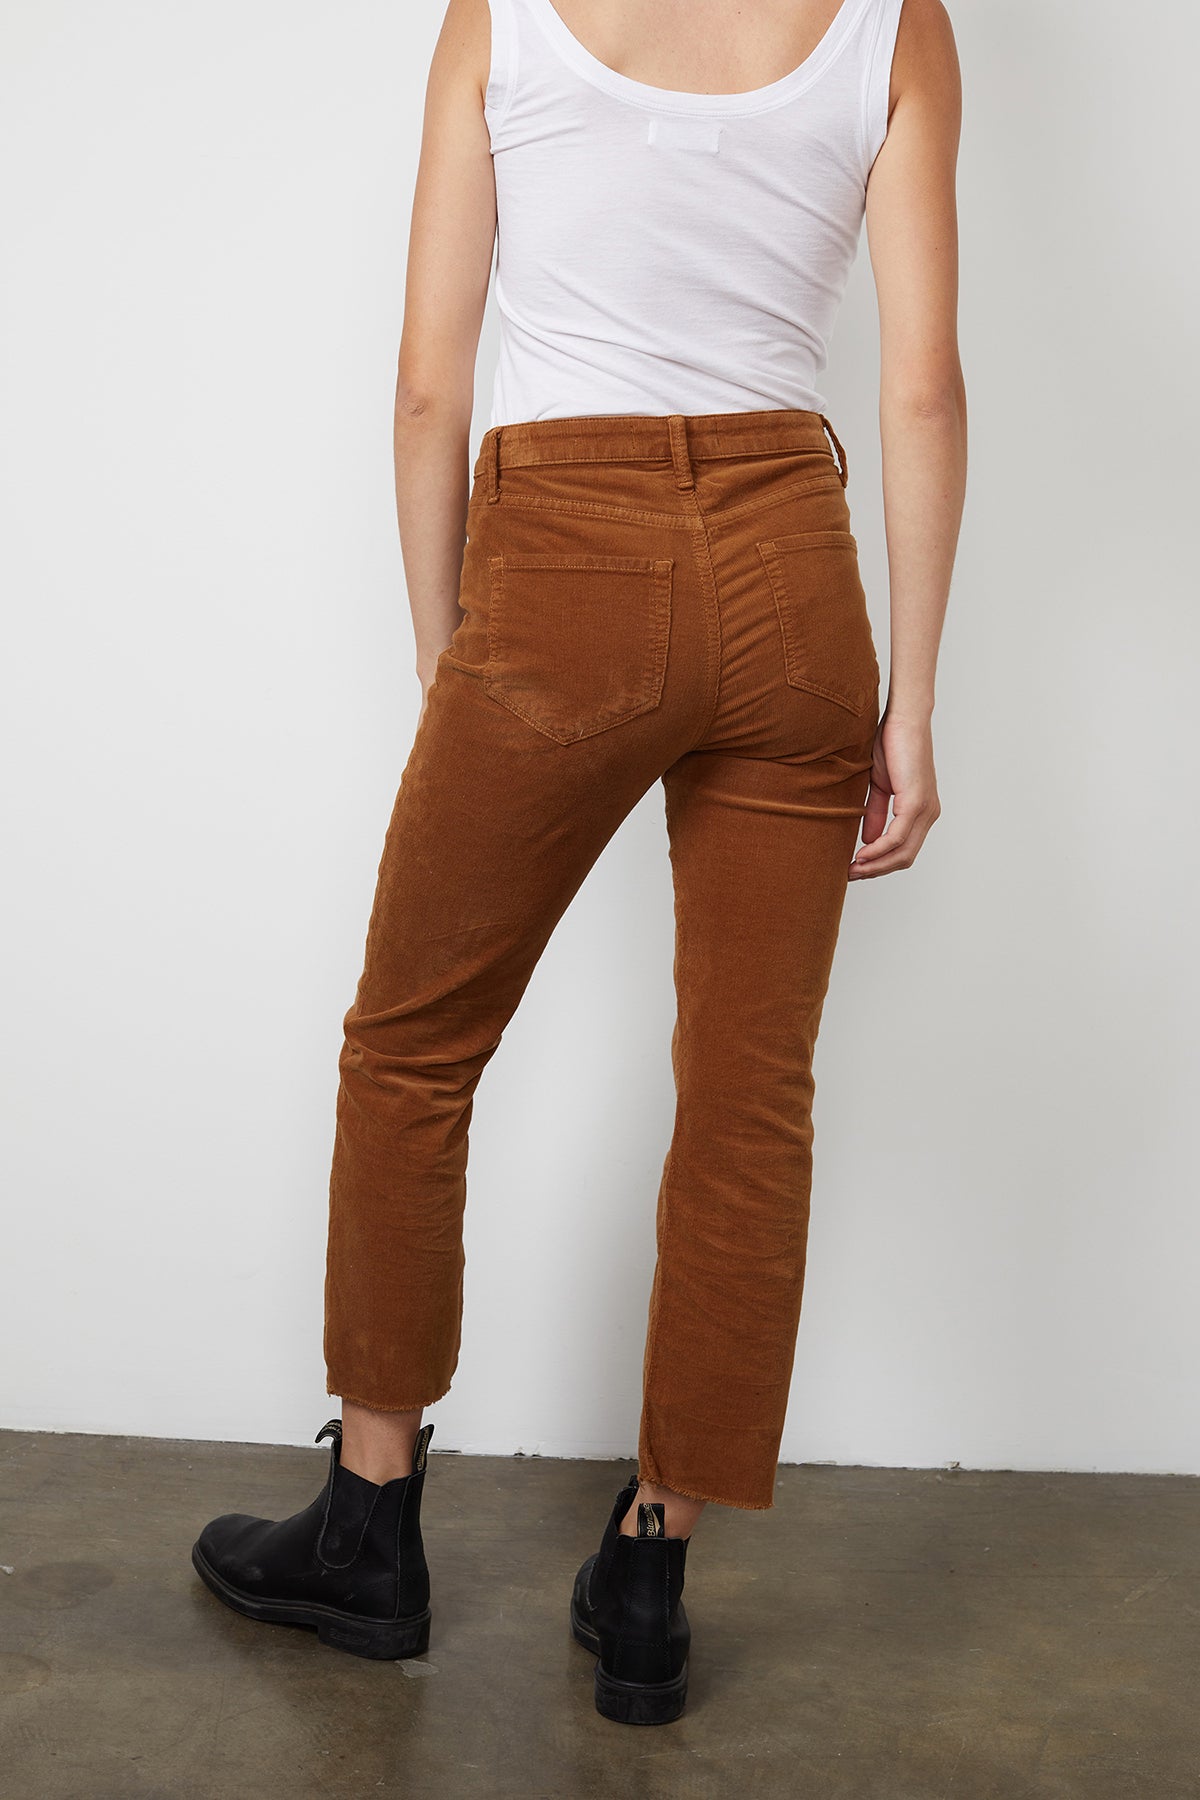 The back view of a person wearing Velvet by Graham & Spencer's CANDACE CORDUROY HIGH RISE CROP JEAN.-14890707878081